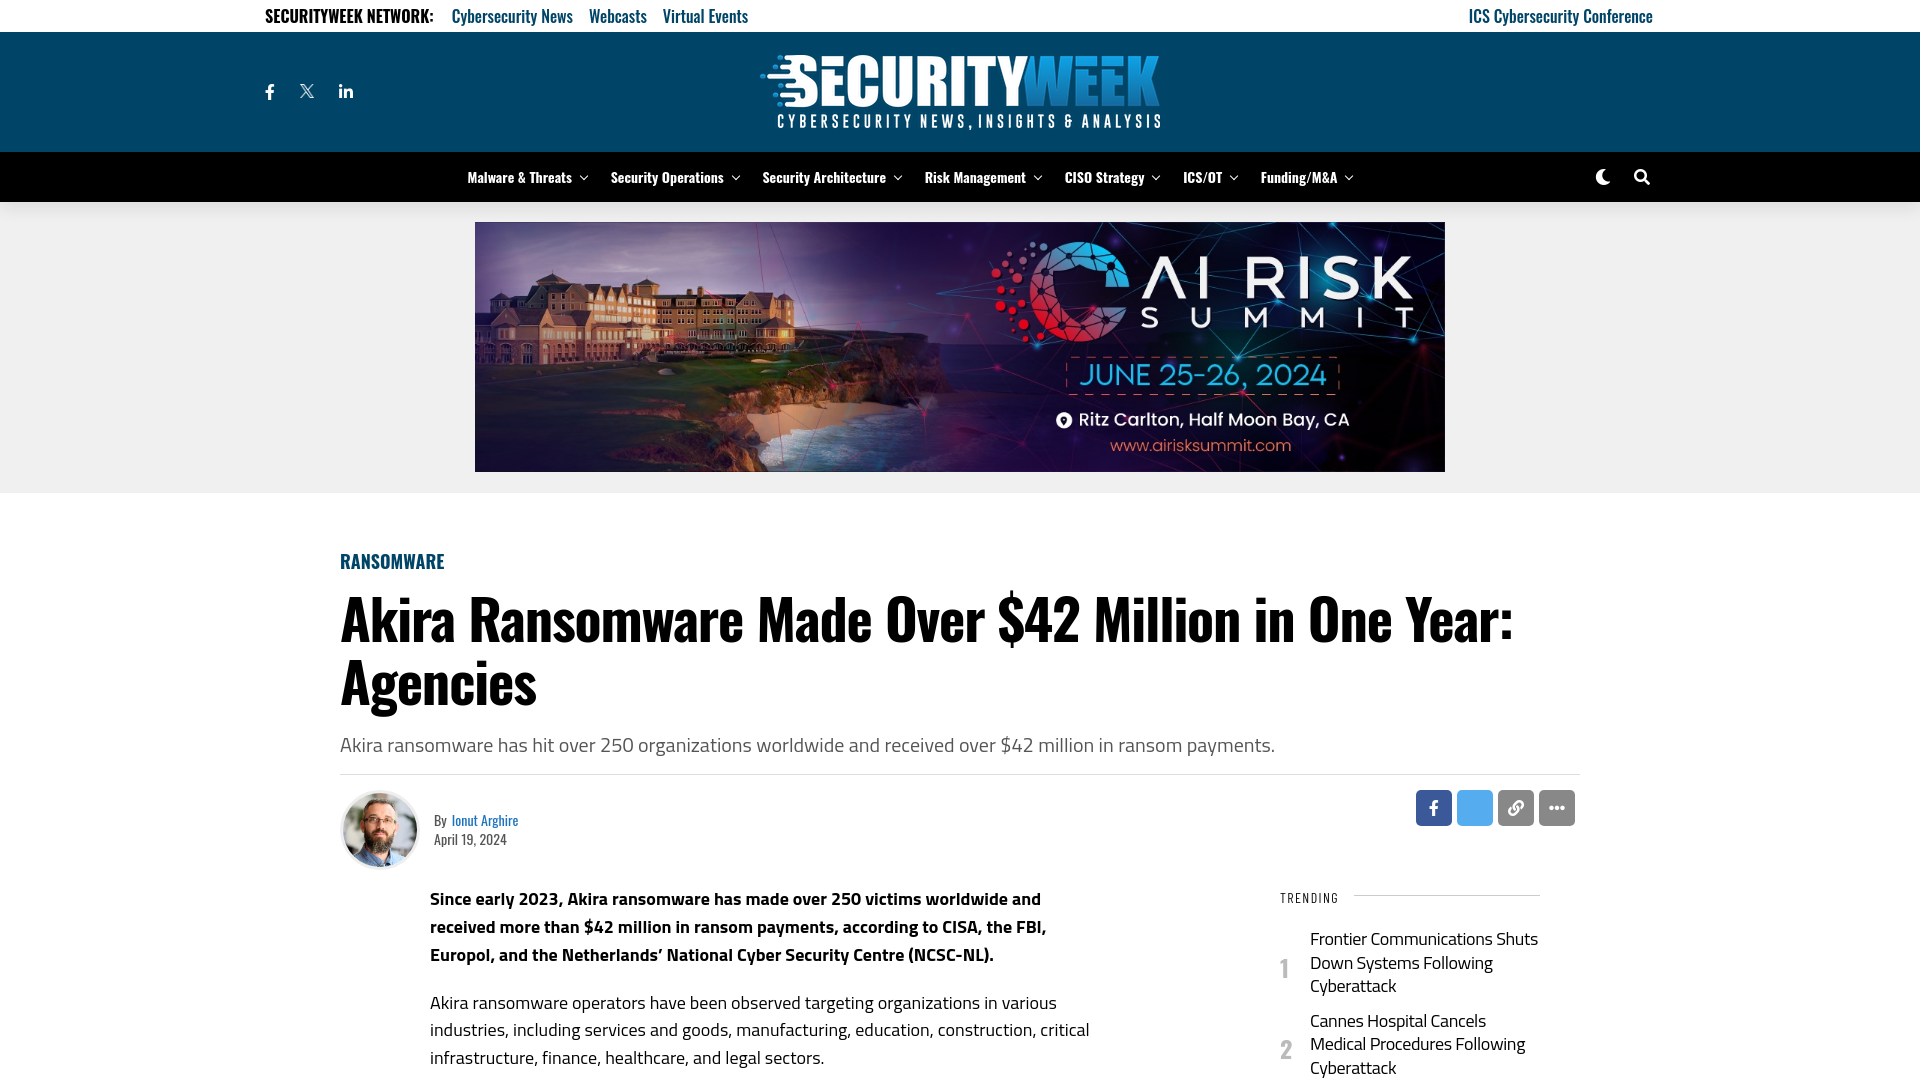 Akira Ransomware Made Over $42 Million in One Year: Agencies - SecurityWeek